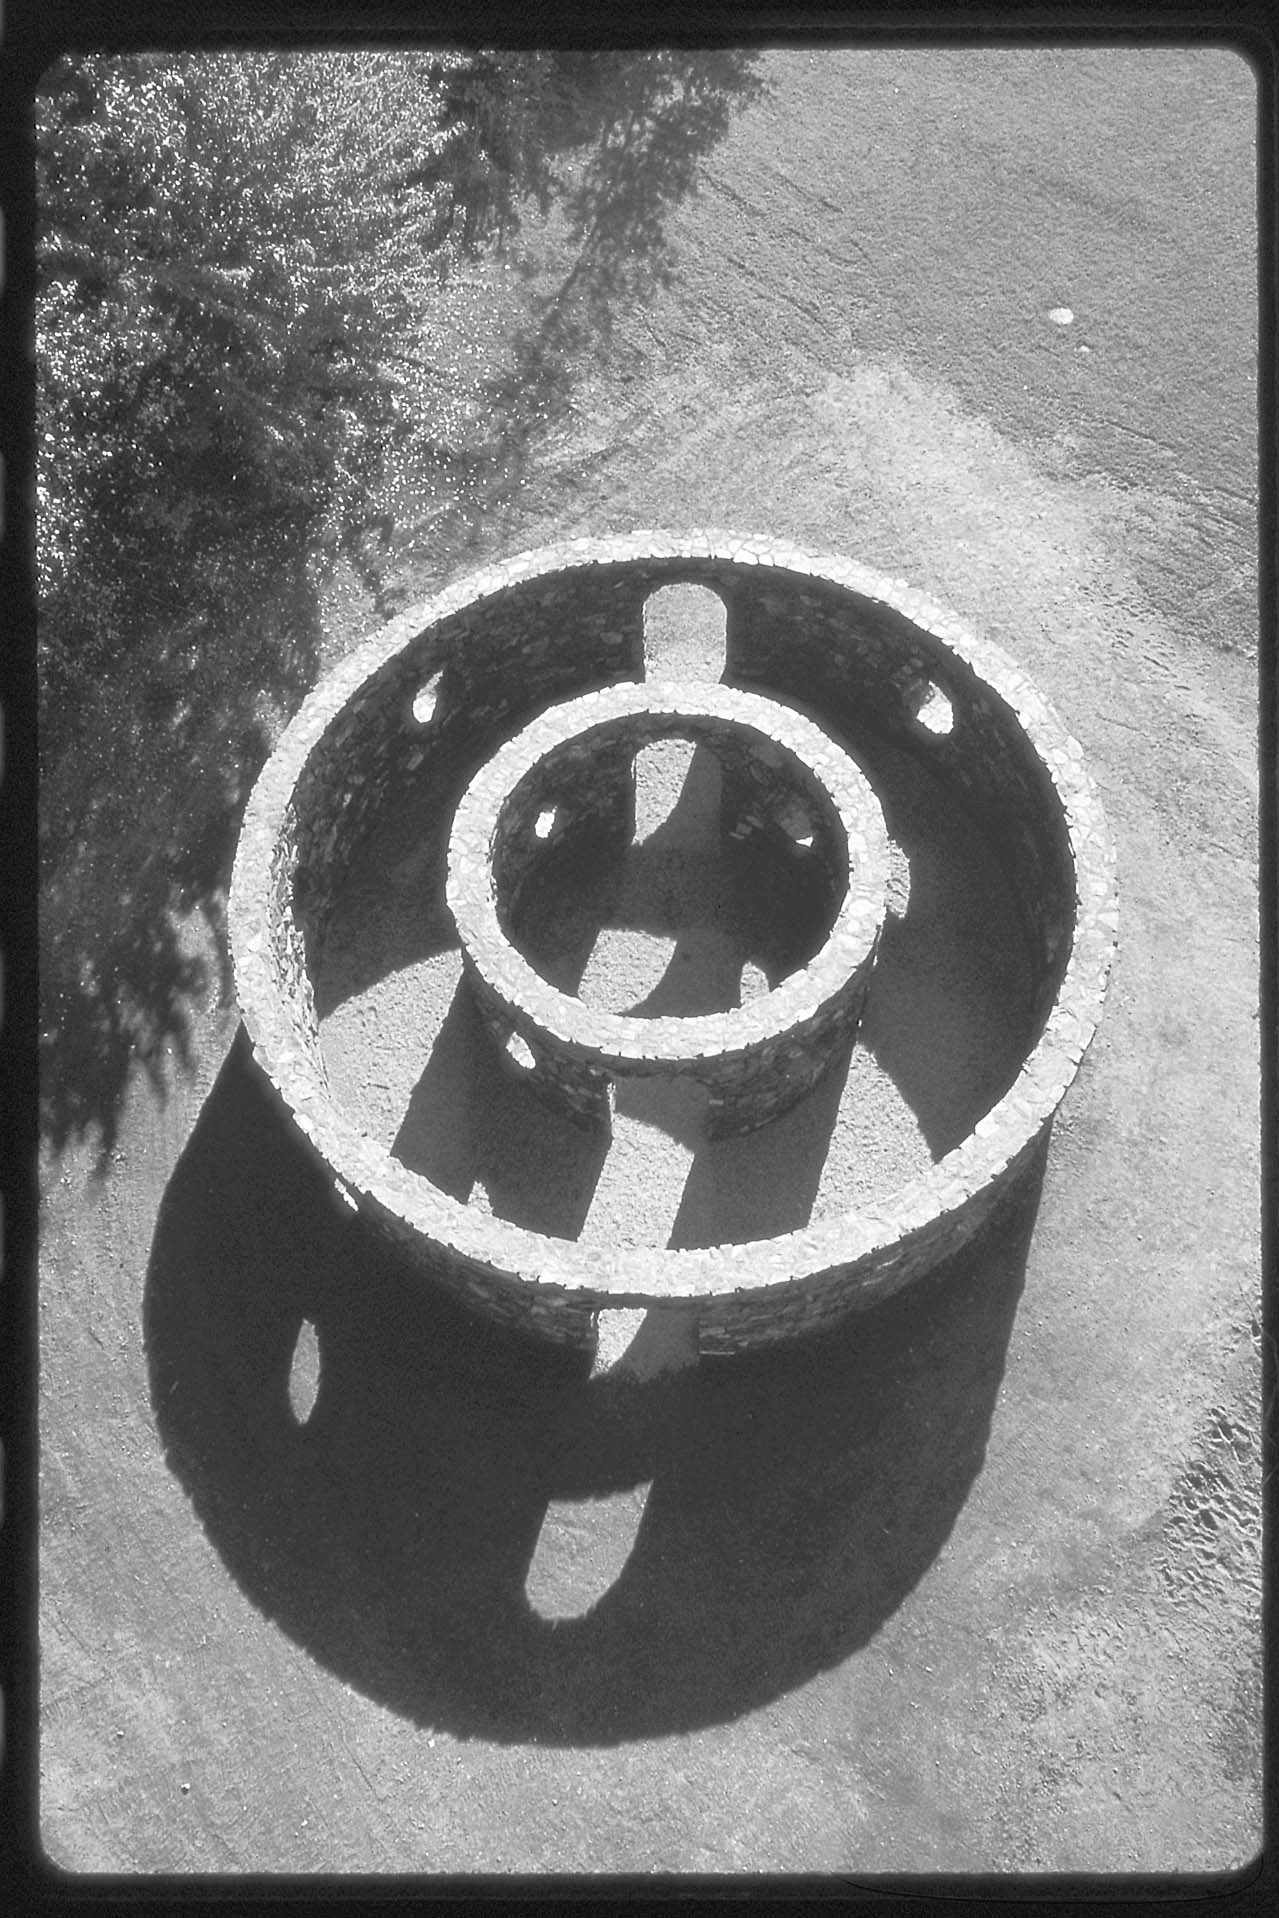 arial view of two concentric rings of masonry. angled light reveals shadows of circular openings on the ground adjacent. Black and white photo.